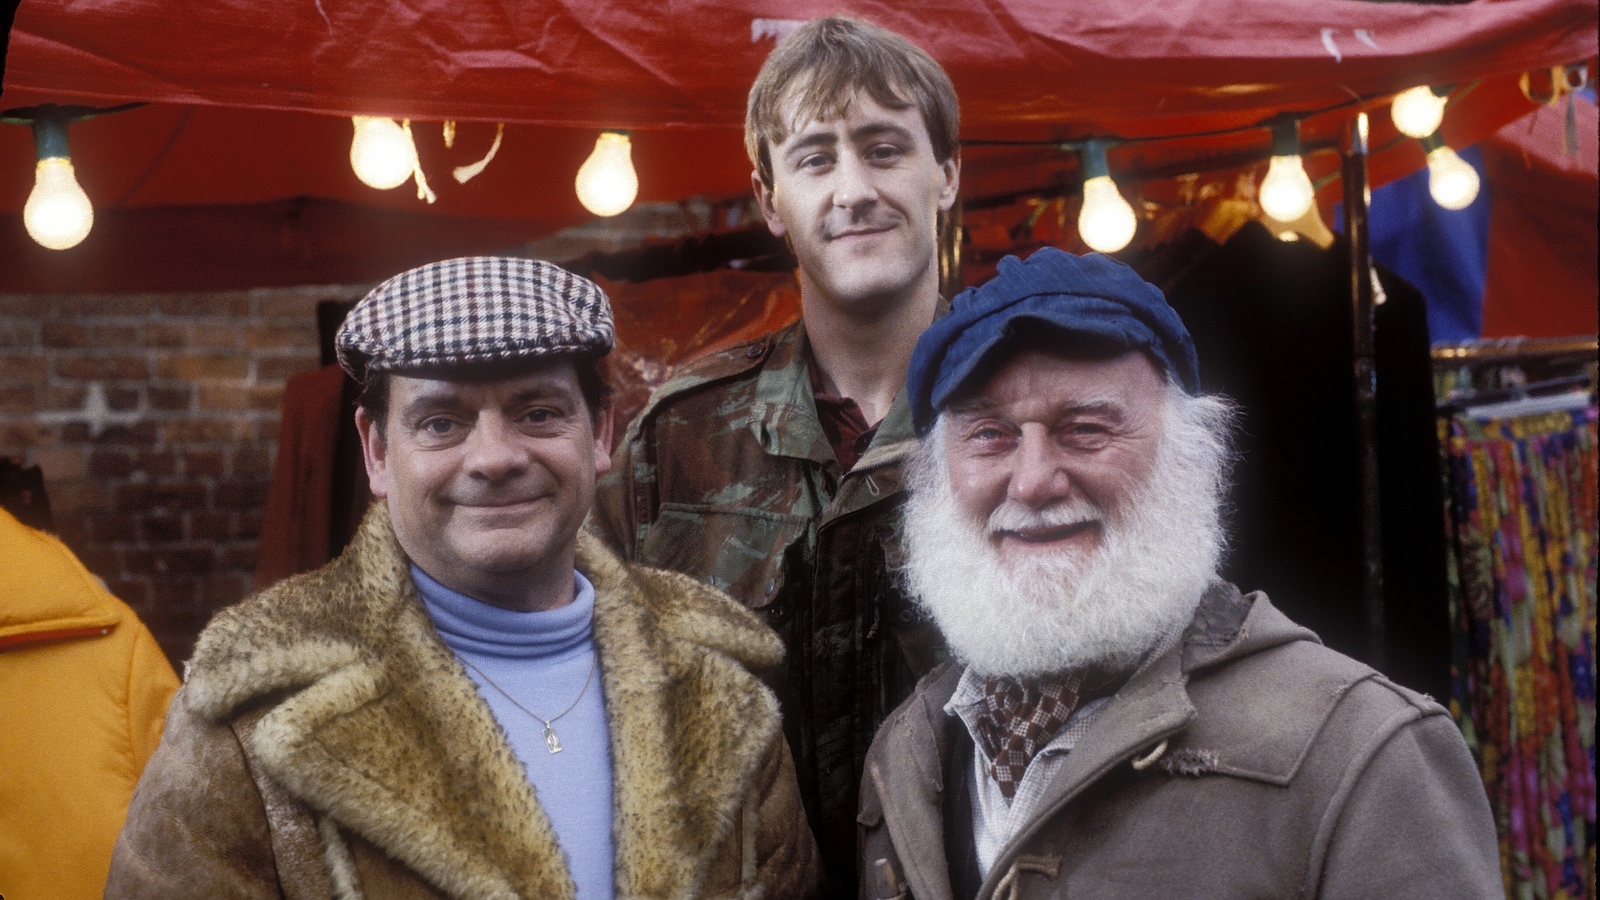 Featured Image Via - David Jason Only Fools And Horses , HD Wallpaper & Backgrounds